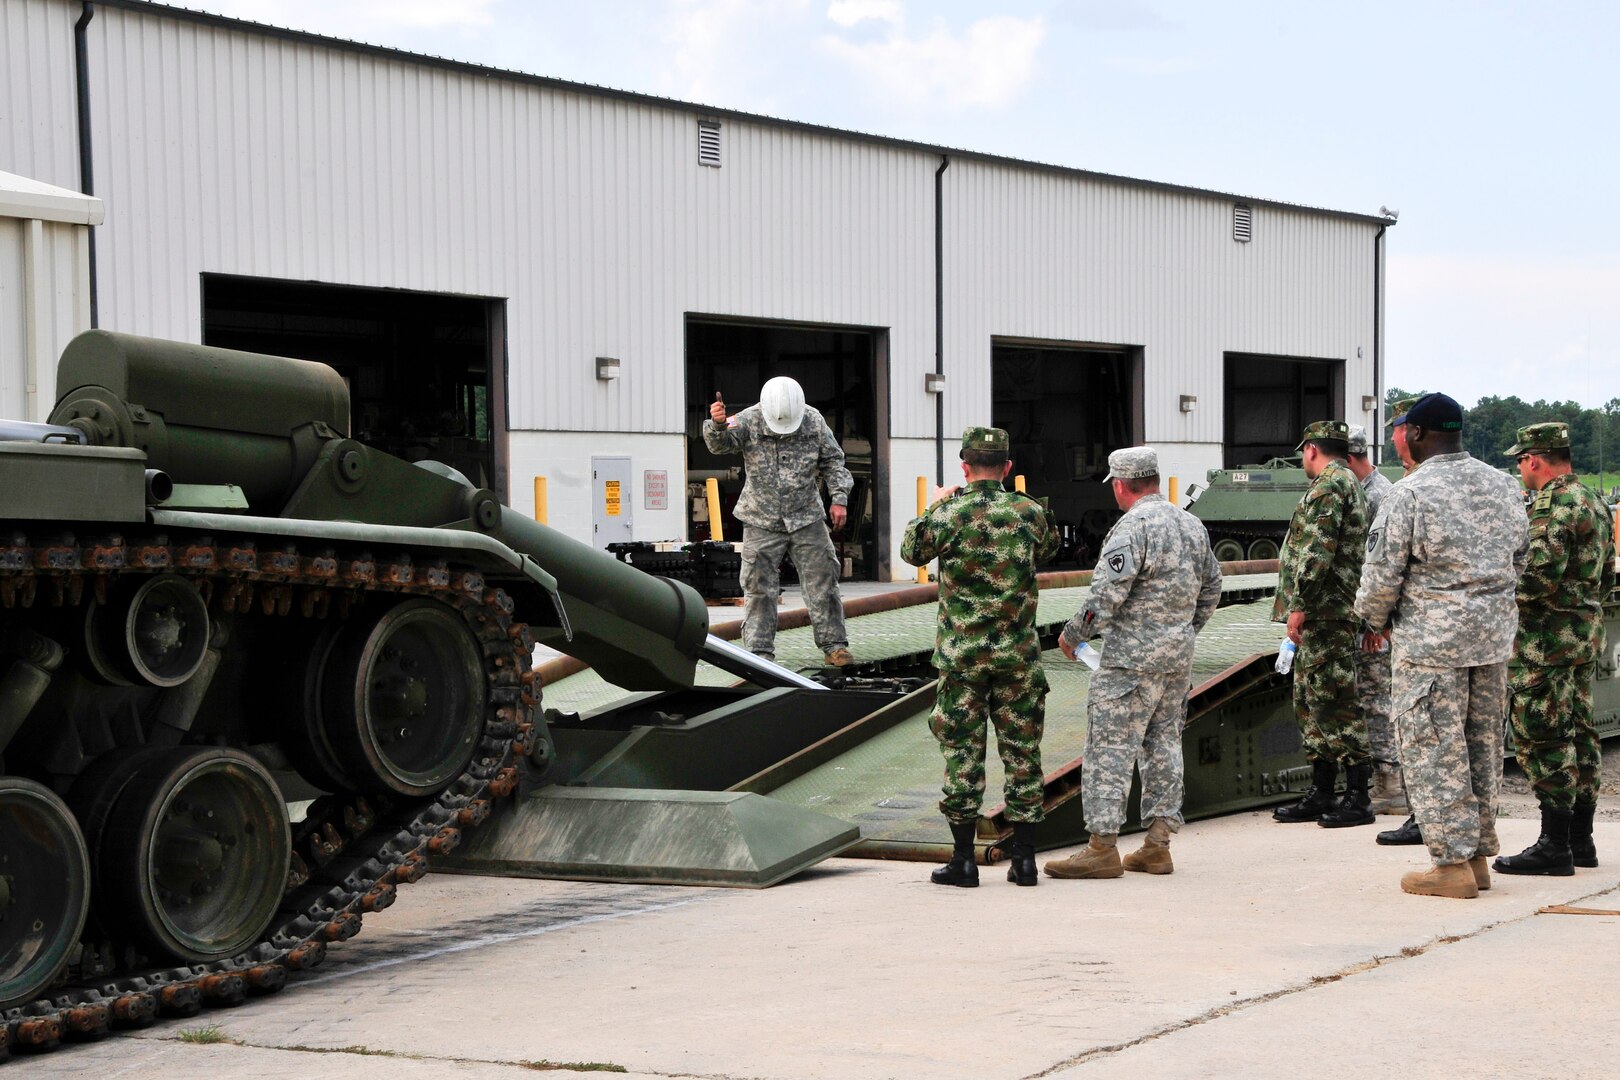 South Carolina Army National Guard Soldiers share maintenance procedures during a visit by a team of Colombian army maintenance and logistics leaders as part of the State Partnership Program between the S.C. National Guard and Colombia, in Eastover, S.C., Aug. 18-22, 2014. 